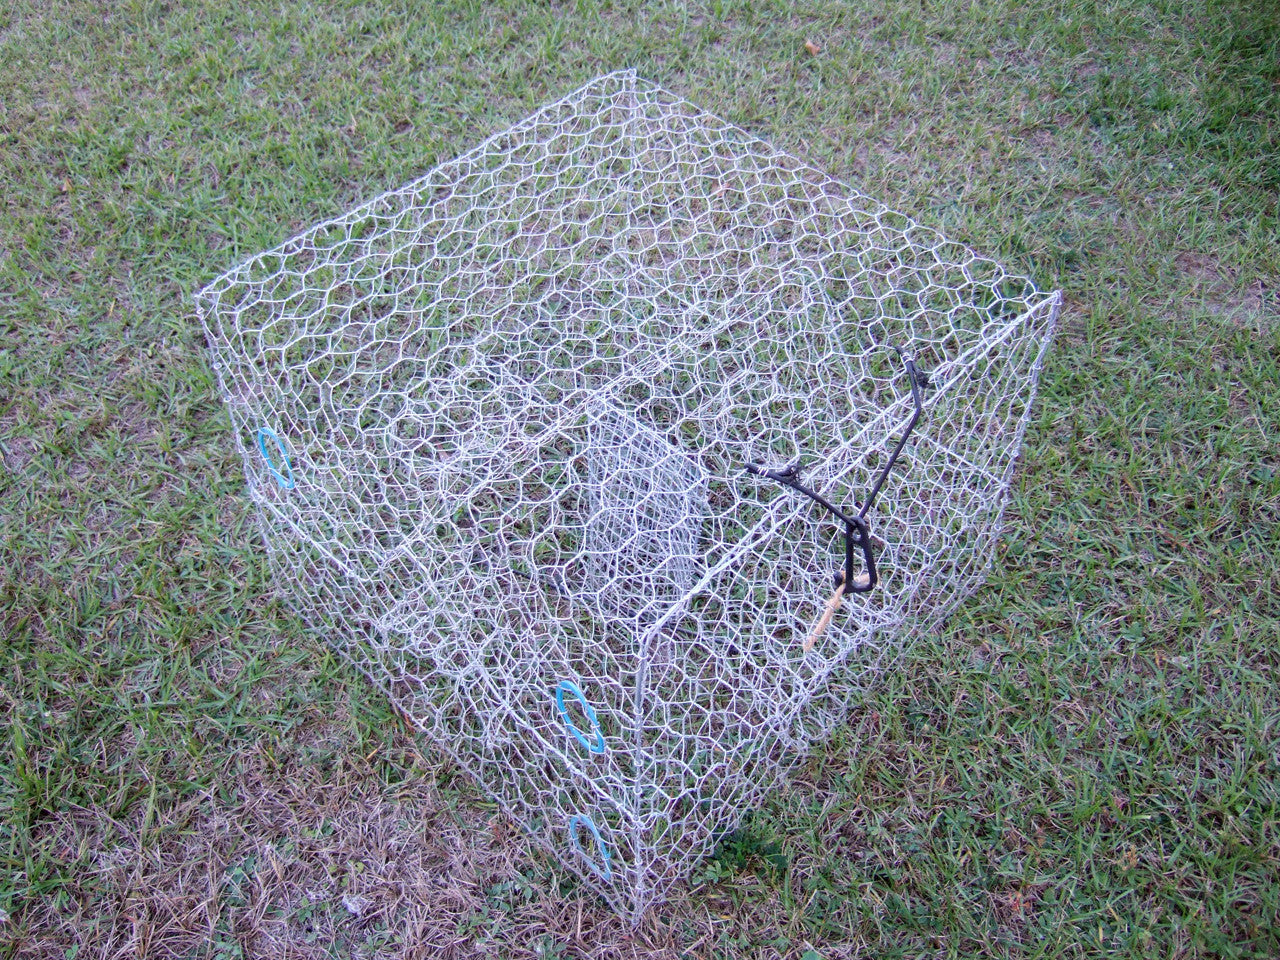 Blue Crab Trap - Galvanized or Vinyl Coated Wire Trap – Lee Fisher Fishing  Supply